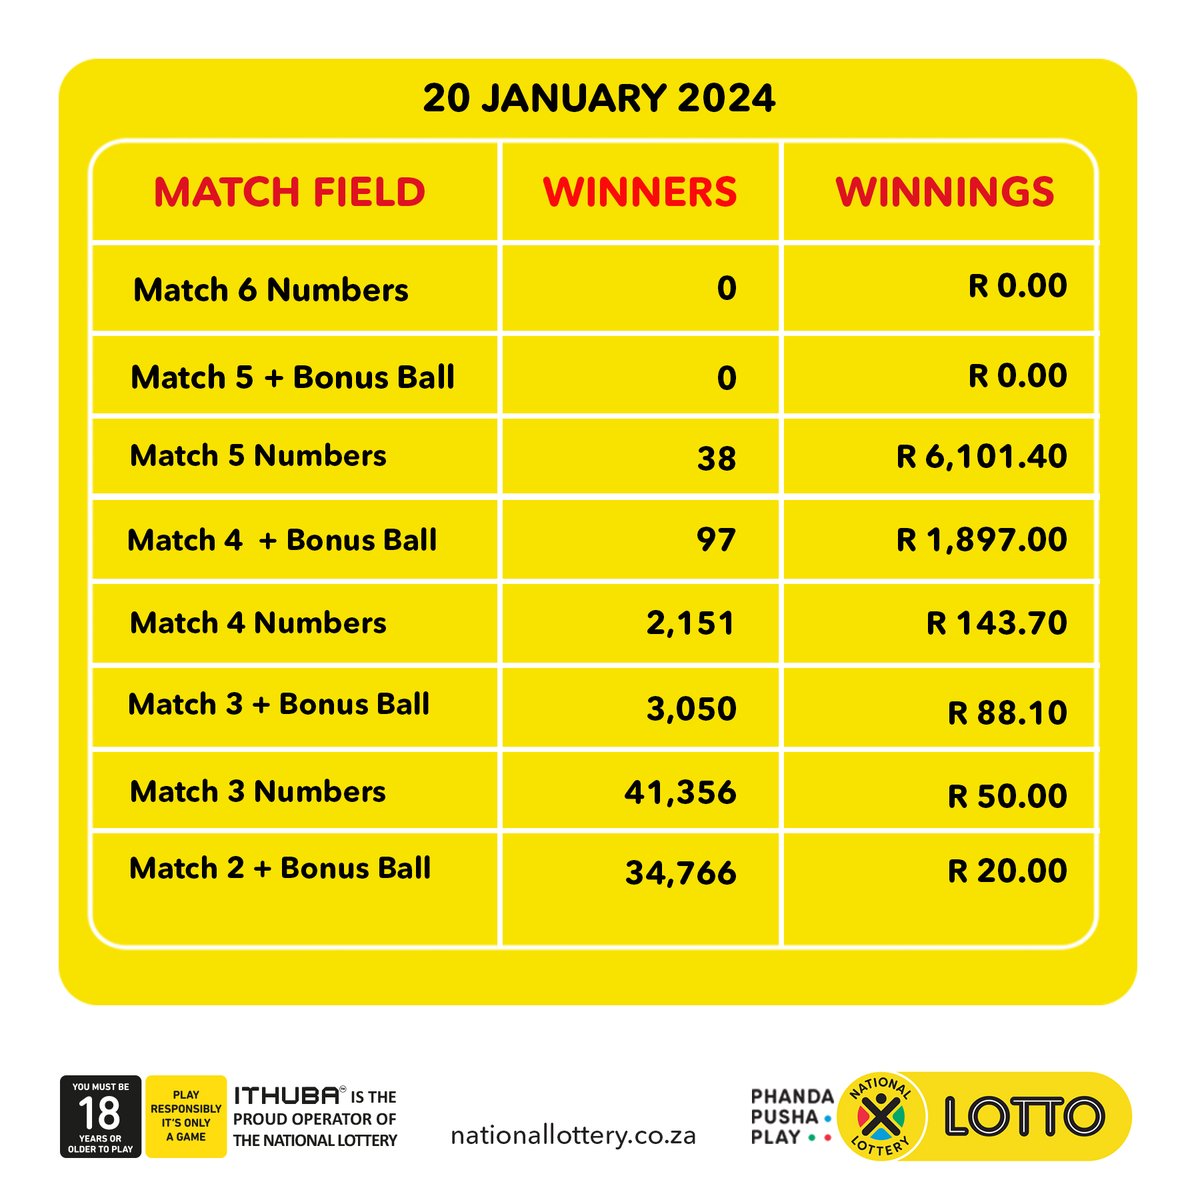 Here are #dividends for the #LOTTO draw on (20/01/24)! You have another chance to win the rollover jackpot!